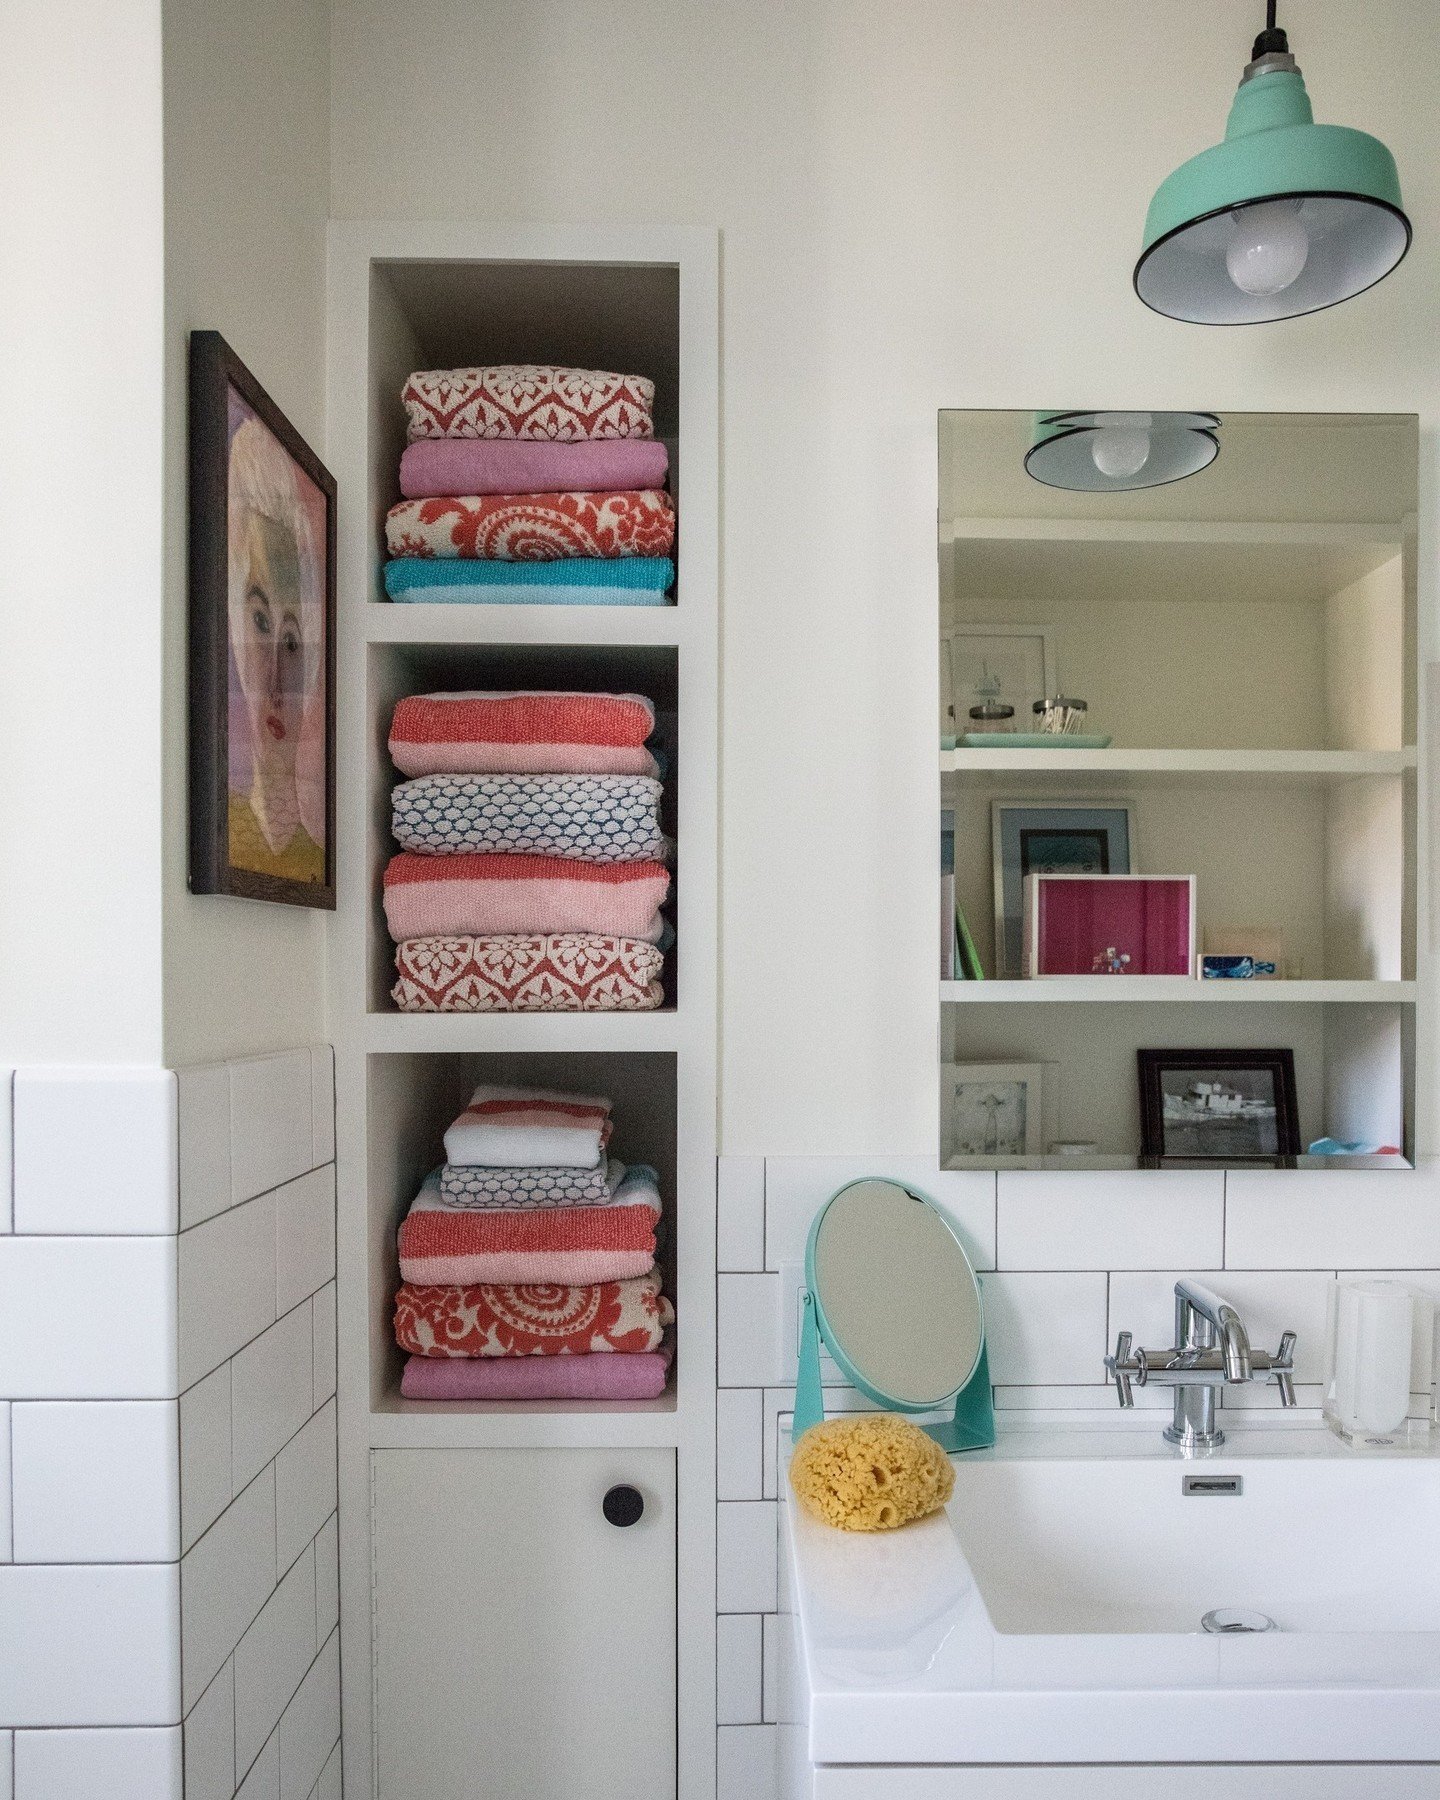 Add instant wow-factor to a neutral bathroom through colorful linens and art.  White is the ideal blank canvas for inspired accessories. ⁠
⁠
📸: @kuohphotographyinteriors as seen on @housebeautiful ⁠
⁠
#studiomunroe #roomoftheday #roomwithaview #inte